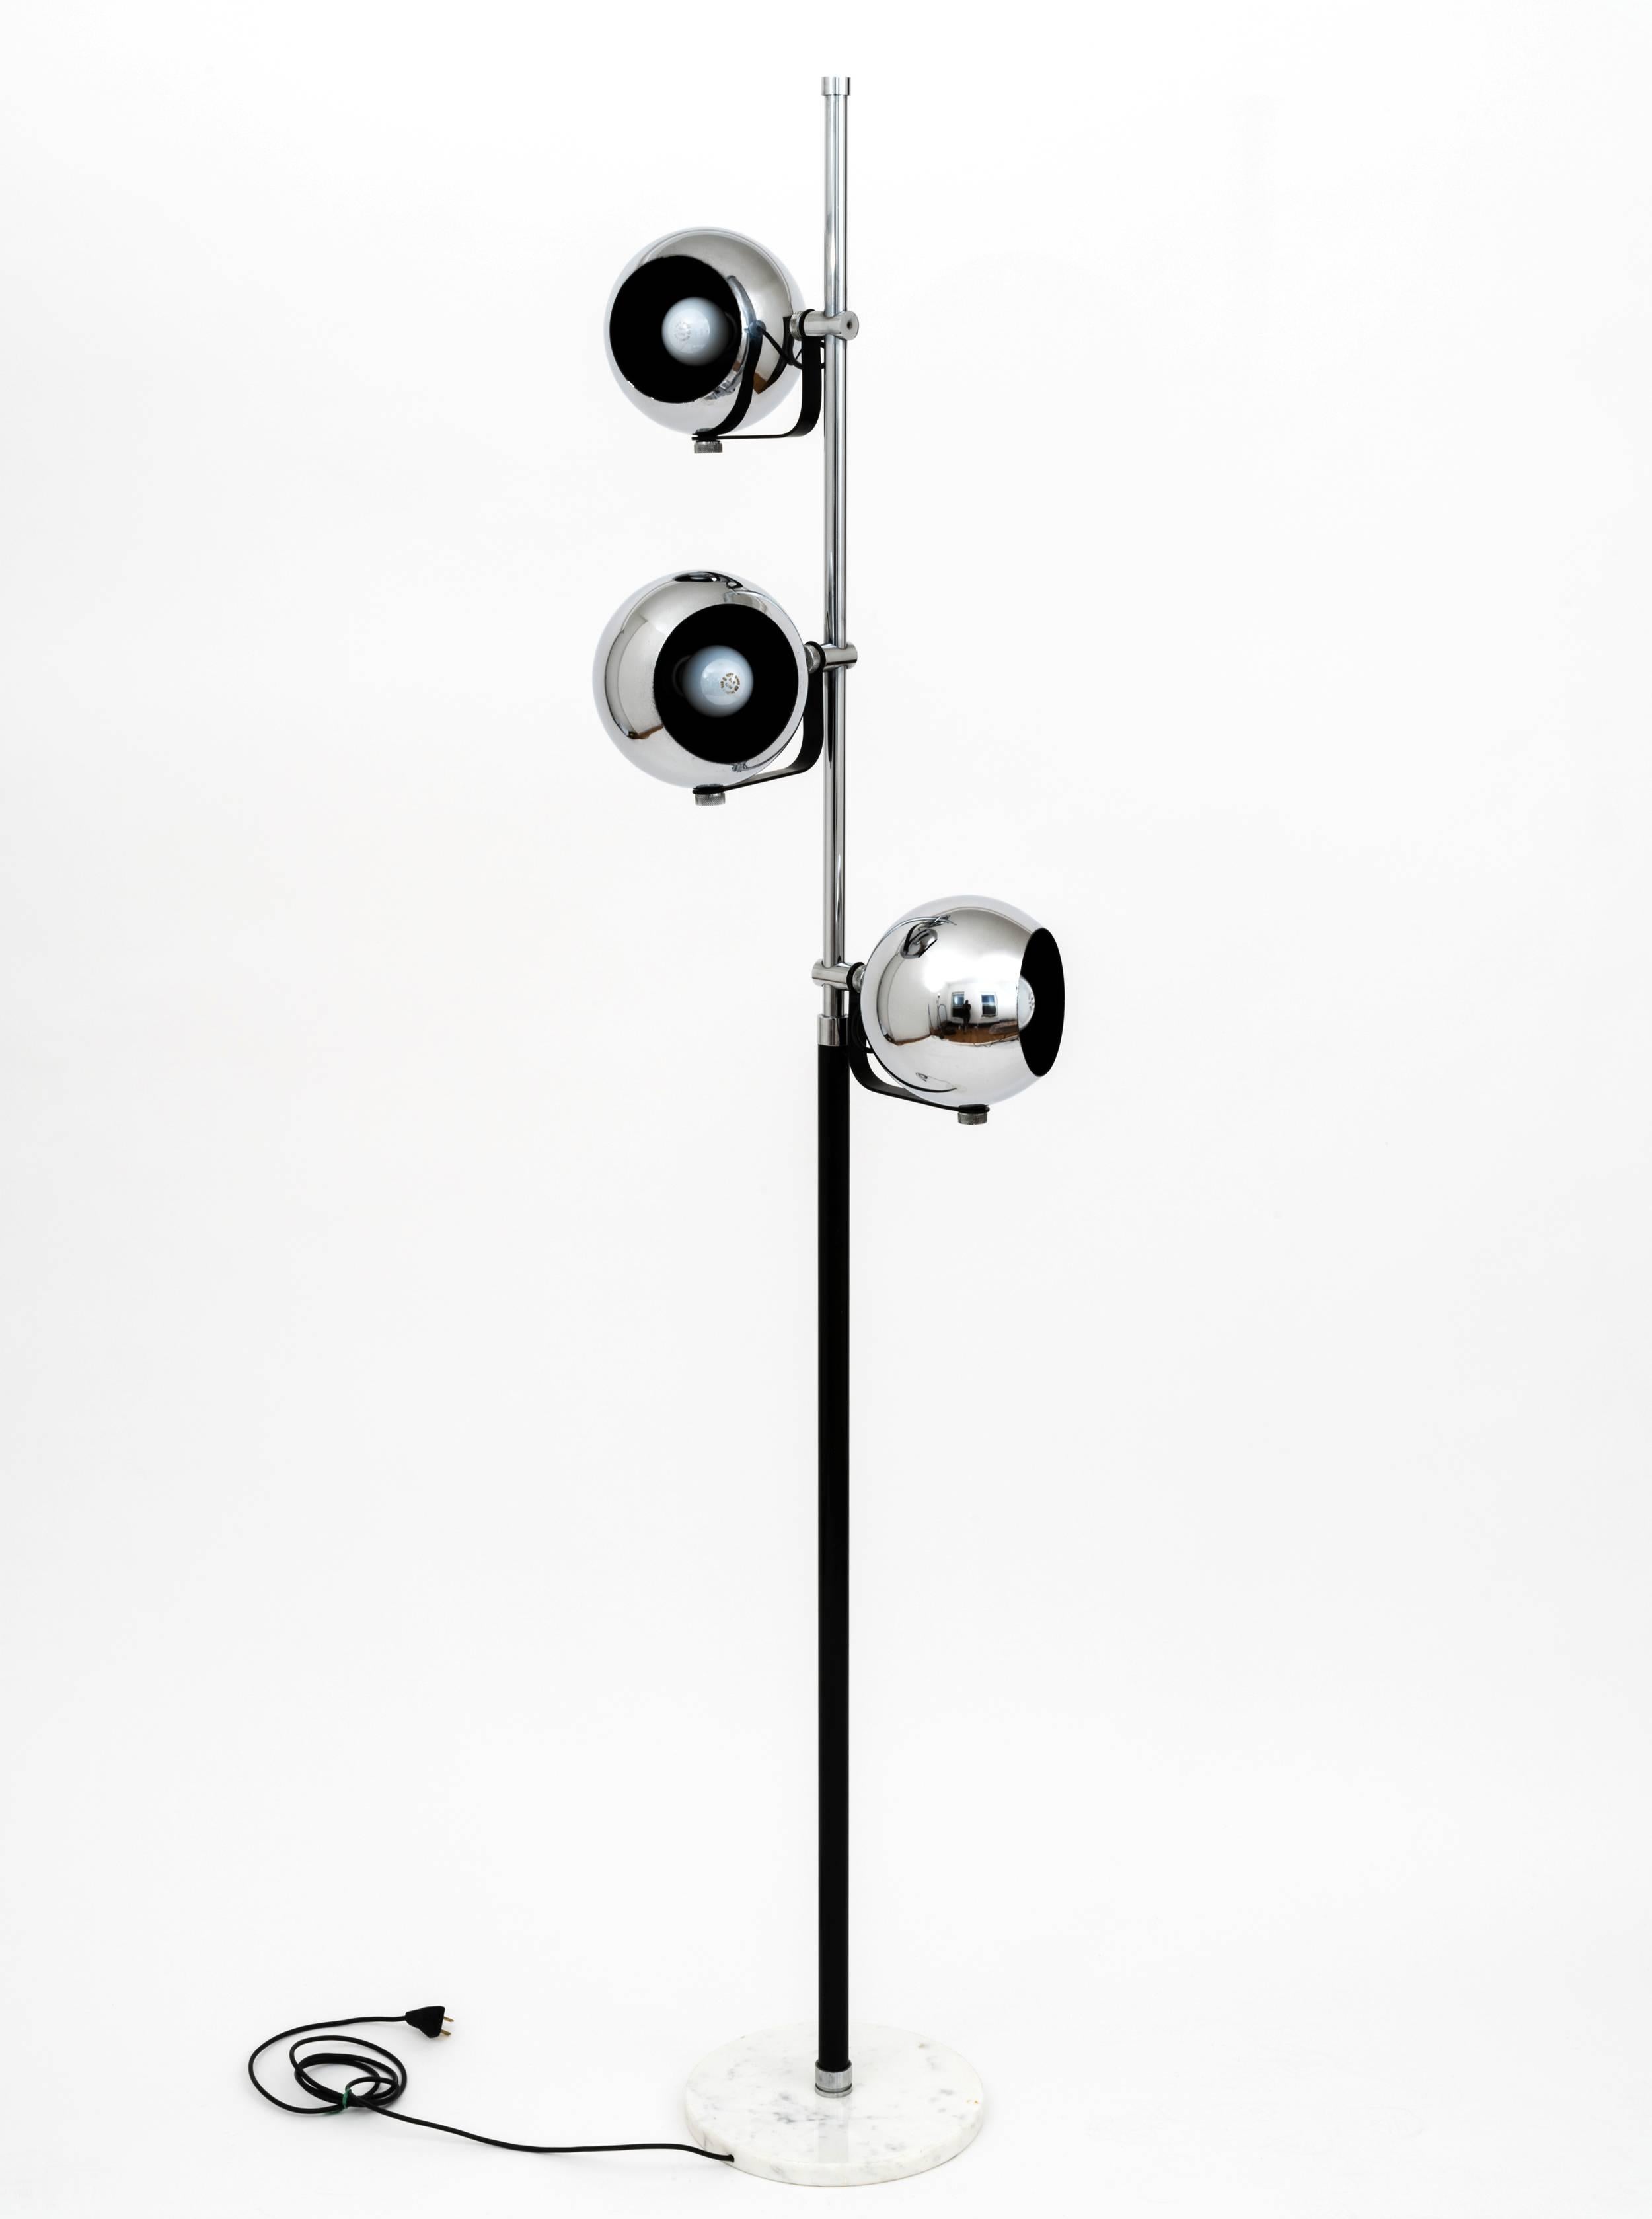 A 1960s floor lamp in the style of Arredoluce comprising a 2-part, tubular center column, the top in chrome and the bottom in black-enameled steel, with 3 chrome lights, each with its own on/off switch and mounted to an L-shaped bracket, all